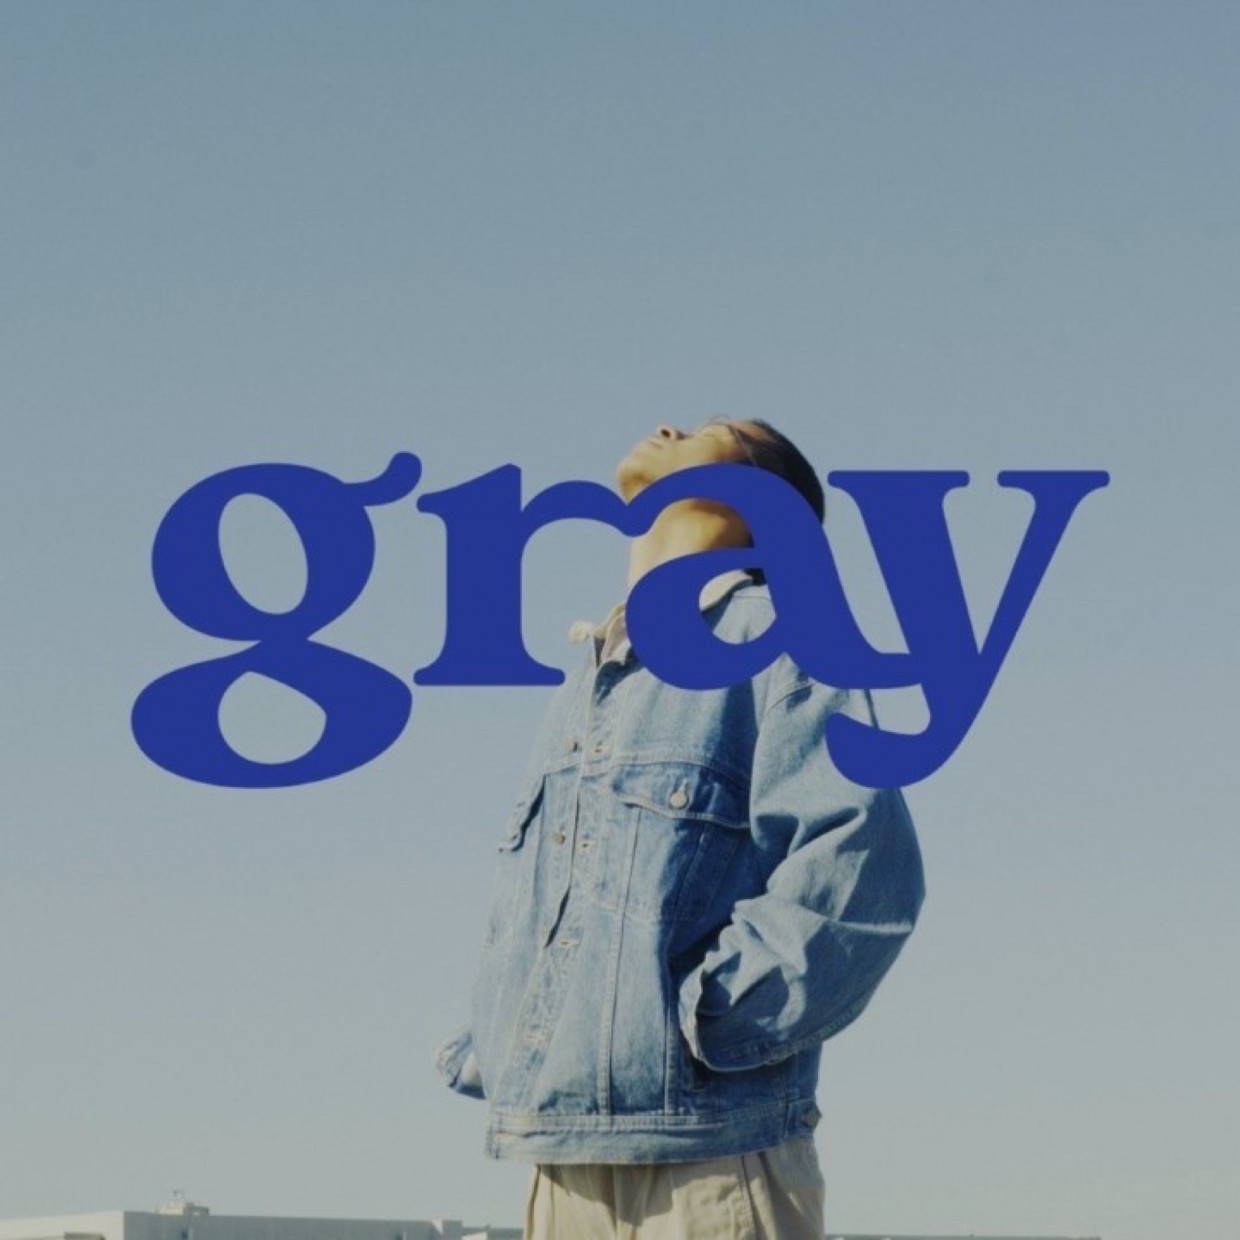 gray POP UP STORE